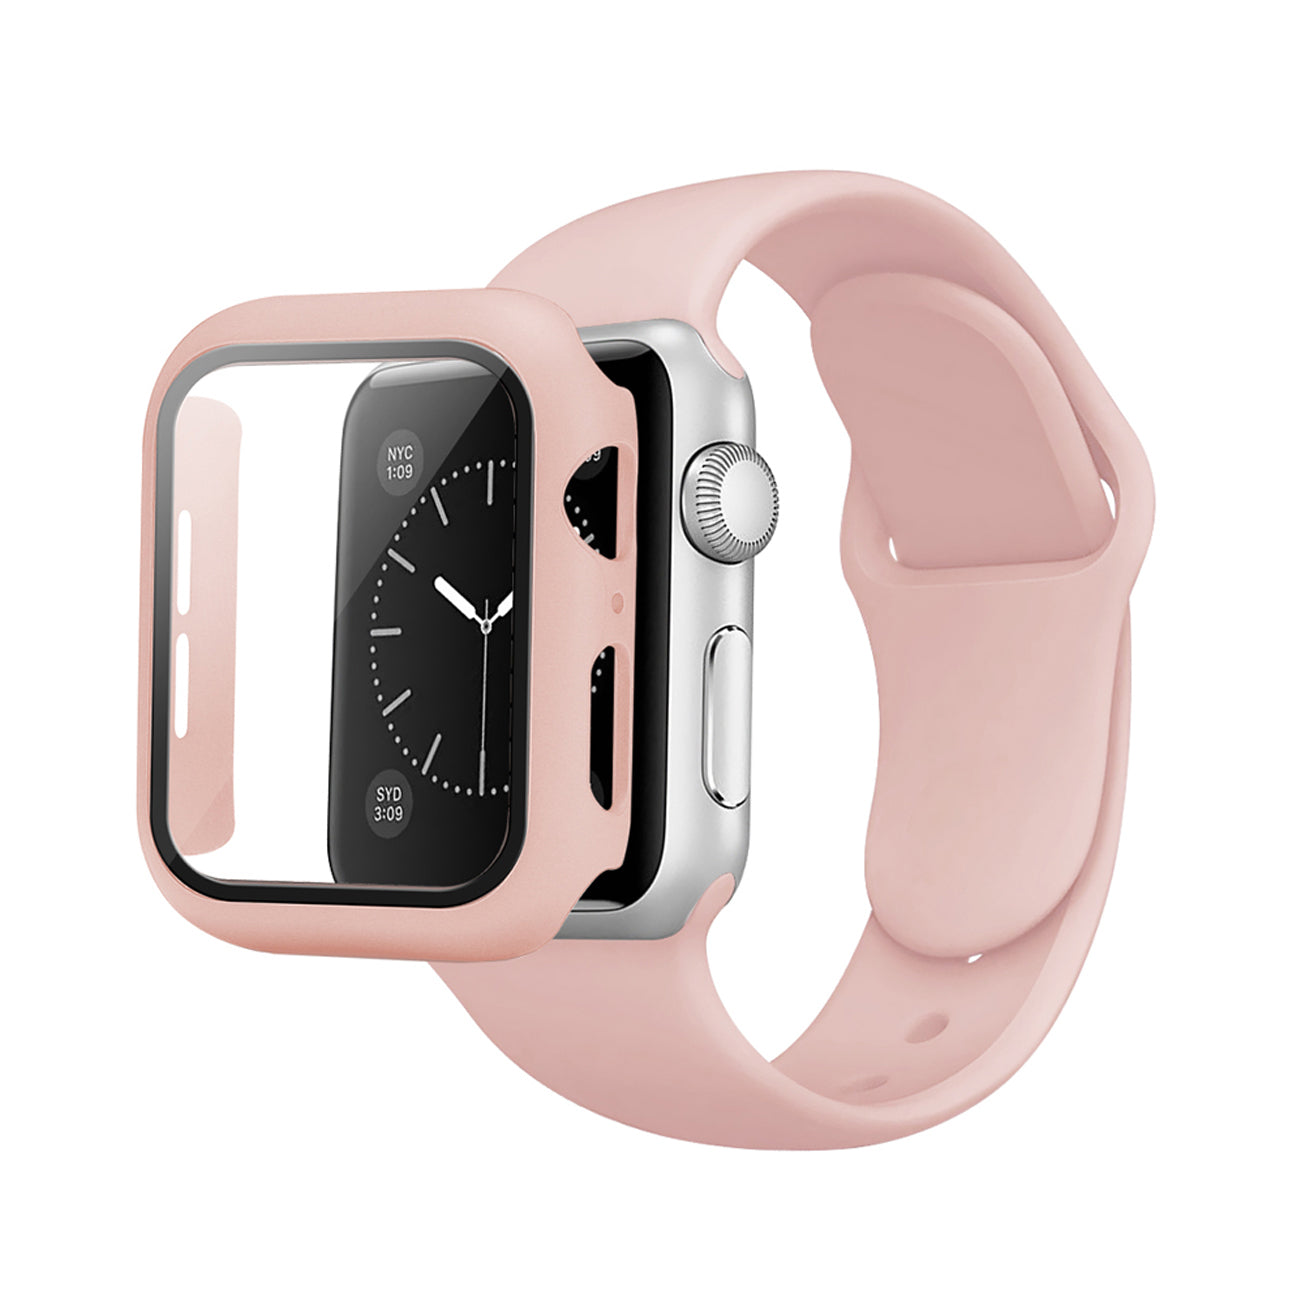 Watch Case PC With Glass Screen Protector, Silicone Watch Band Apple Watch 42mm Pink Color